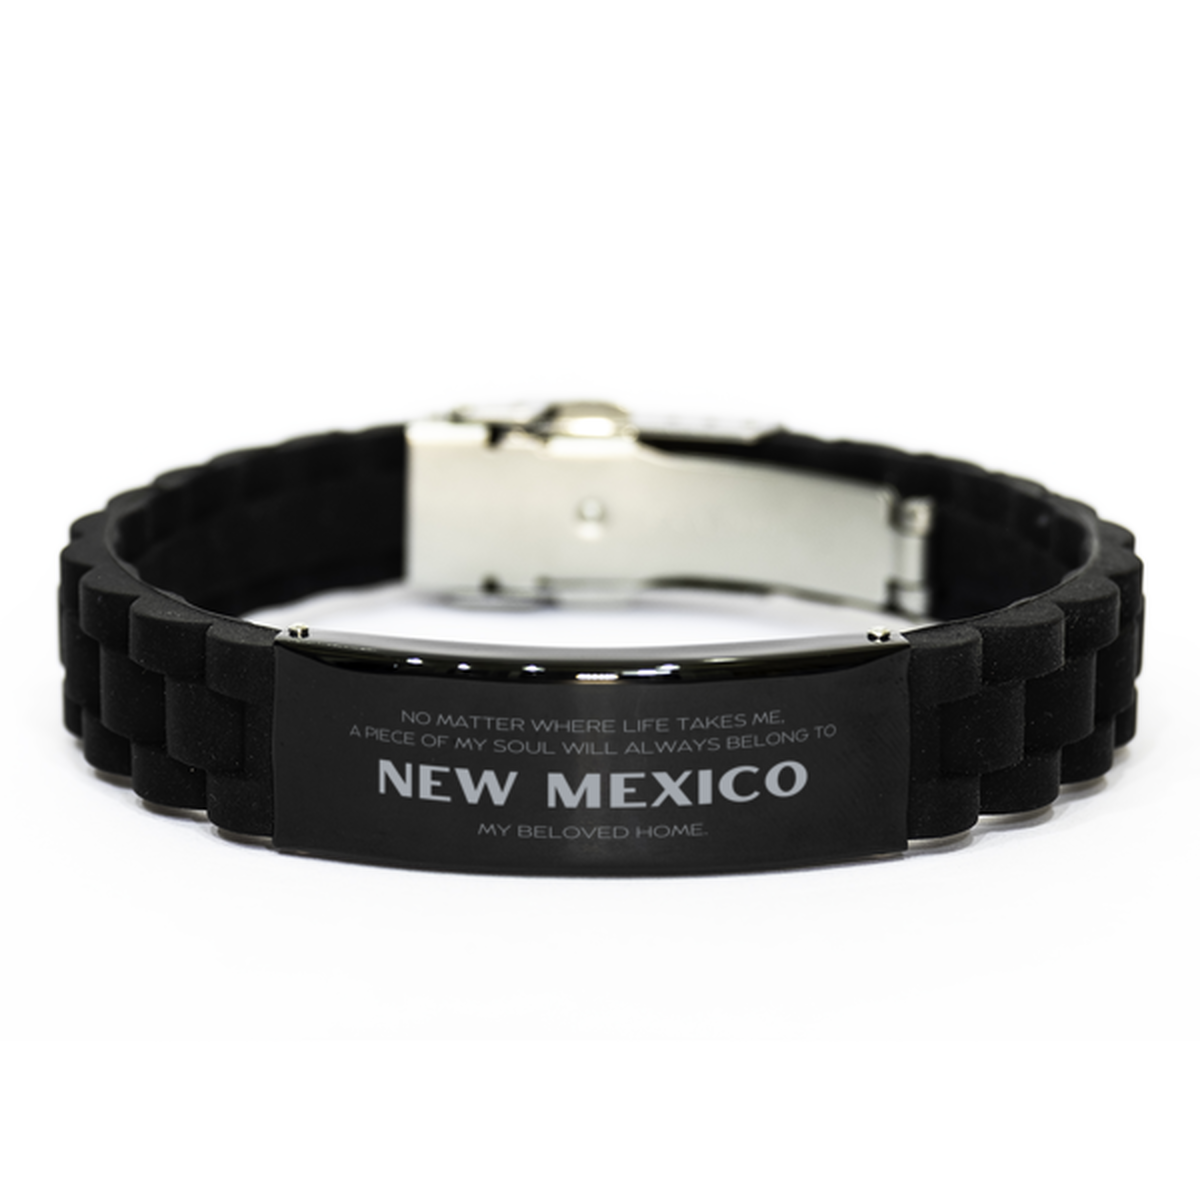 Love New Mexico State Gifts, My soul will always belong to New Mexico, Proud Black Glidelock Clasp Bracelet, Birthday Unique Gifts For New Mexico Men, Women, Friends